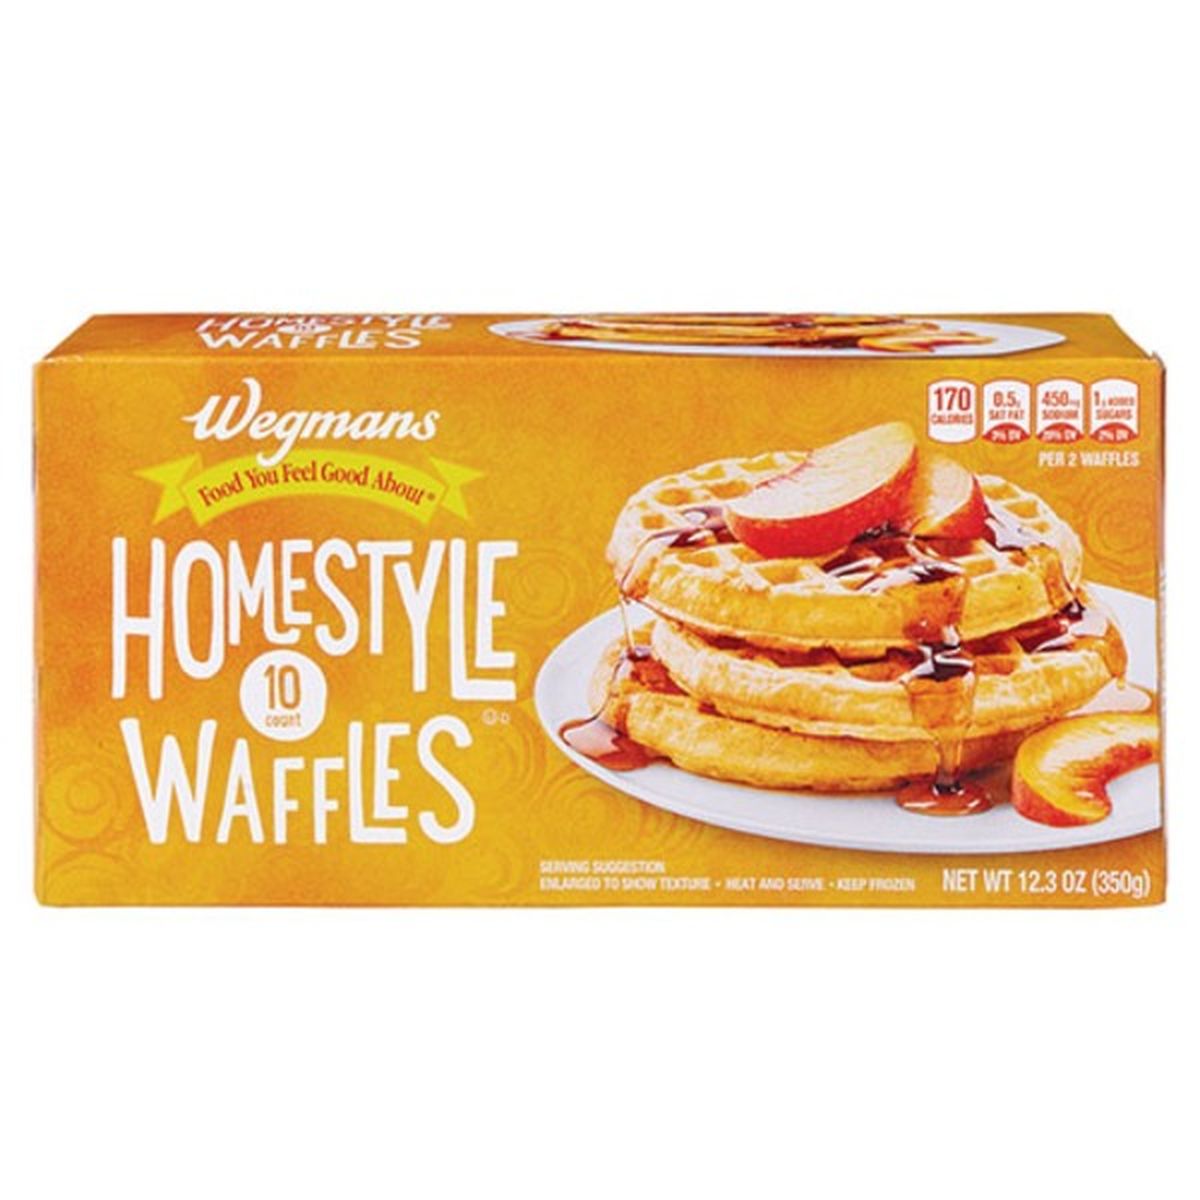 Calories in Wegmans Homestyle Waffles 10 count